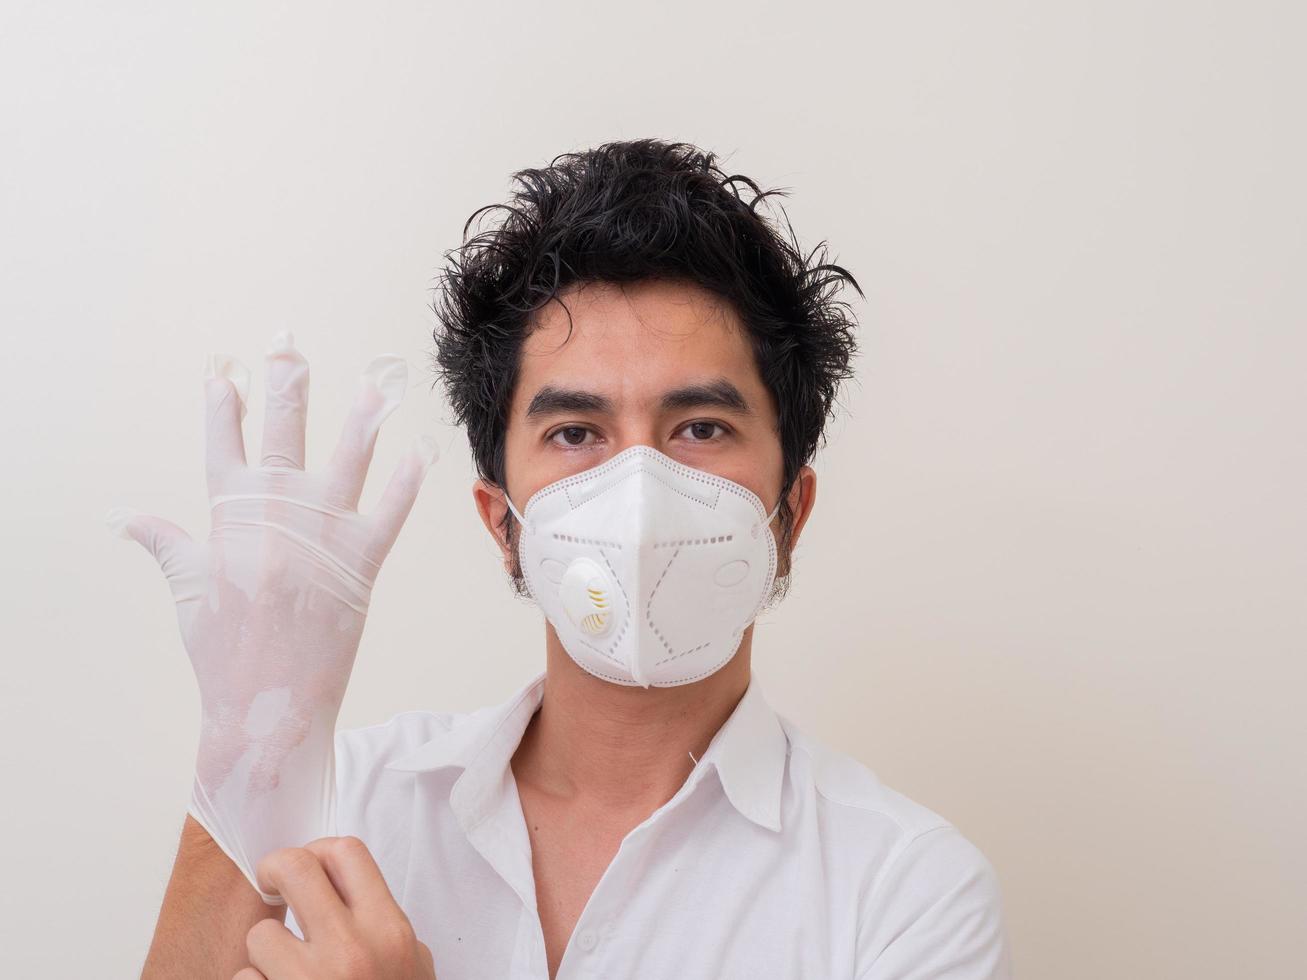 Confident man surgeon in medical mask on face wearing protective sterile glove on hand photo